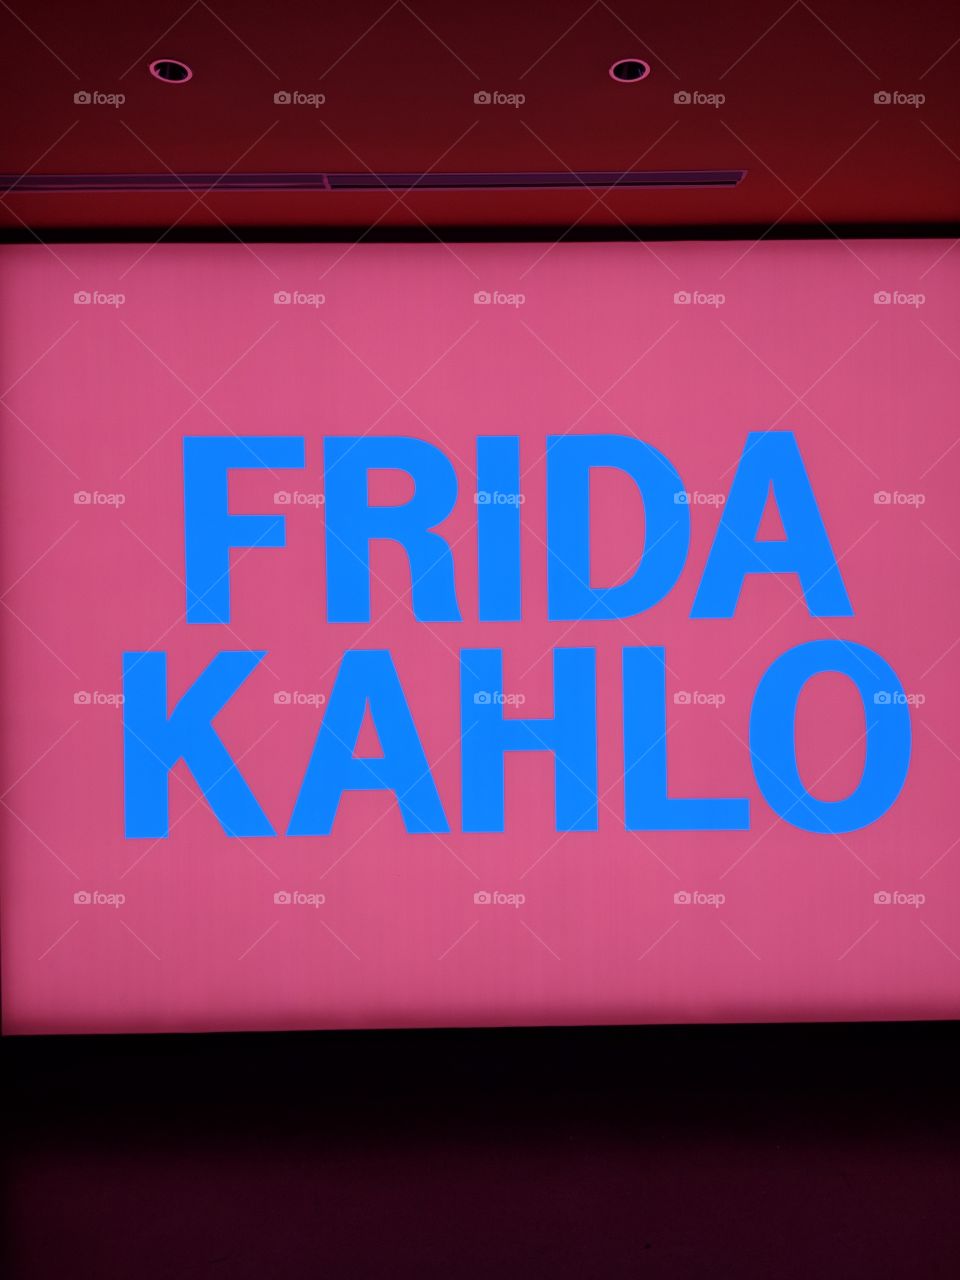 Frida kahlo sign in blue and pink from Brooklyn Museum exhibit